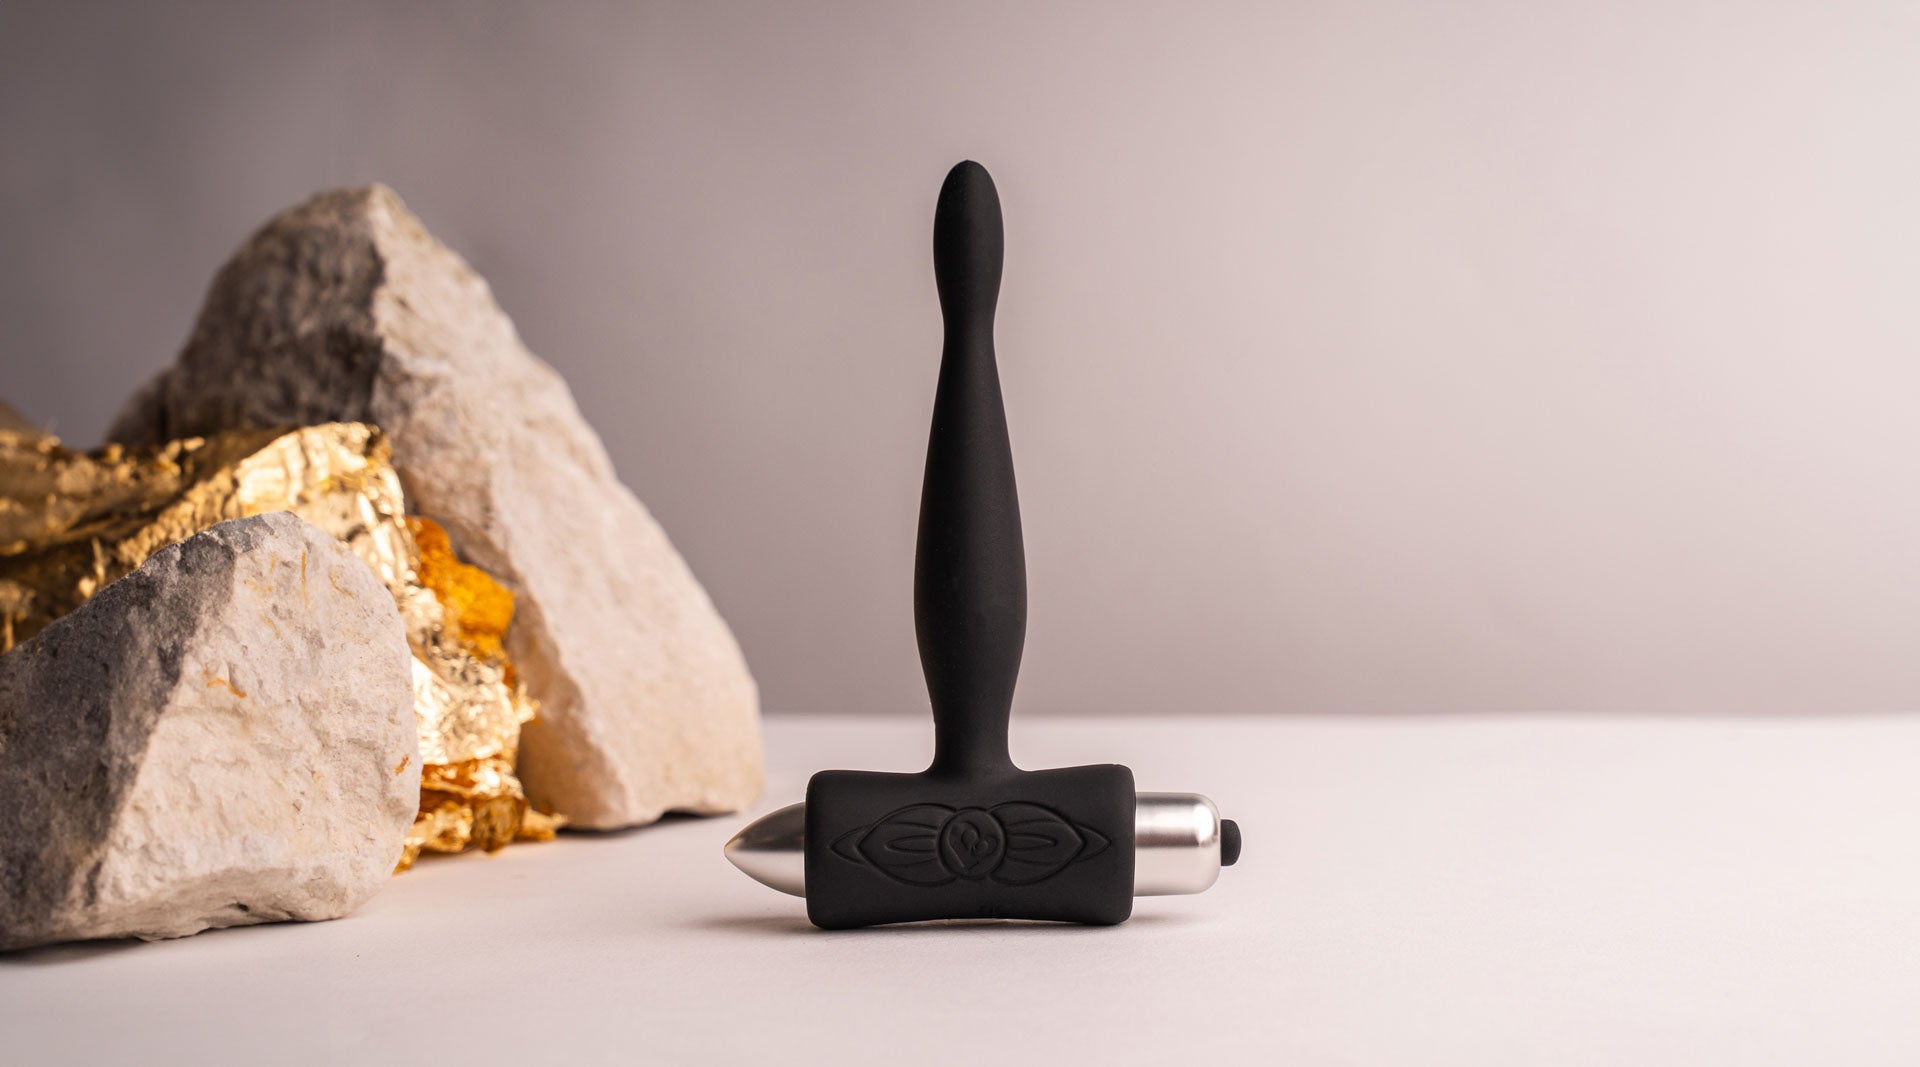 Super slim tipped silicone butt plug in black housing a removable bullet vibrator.